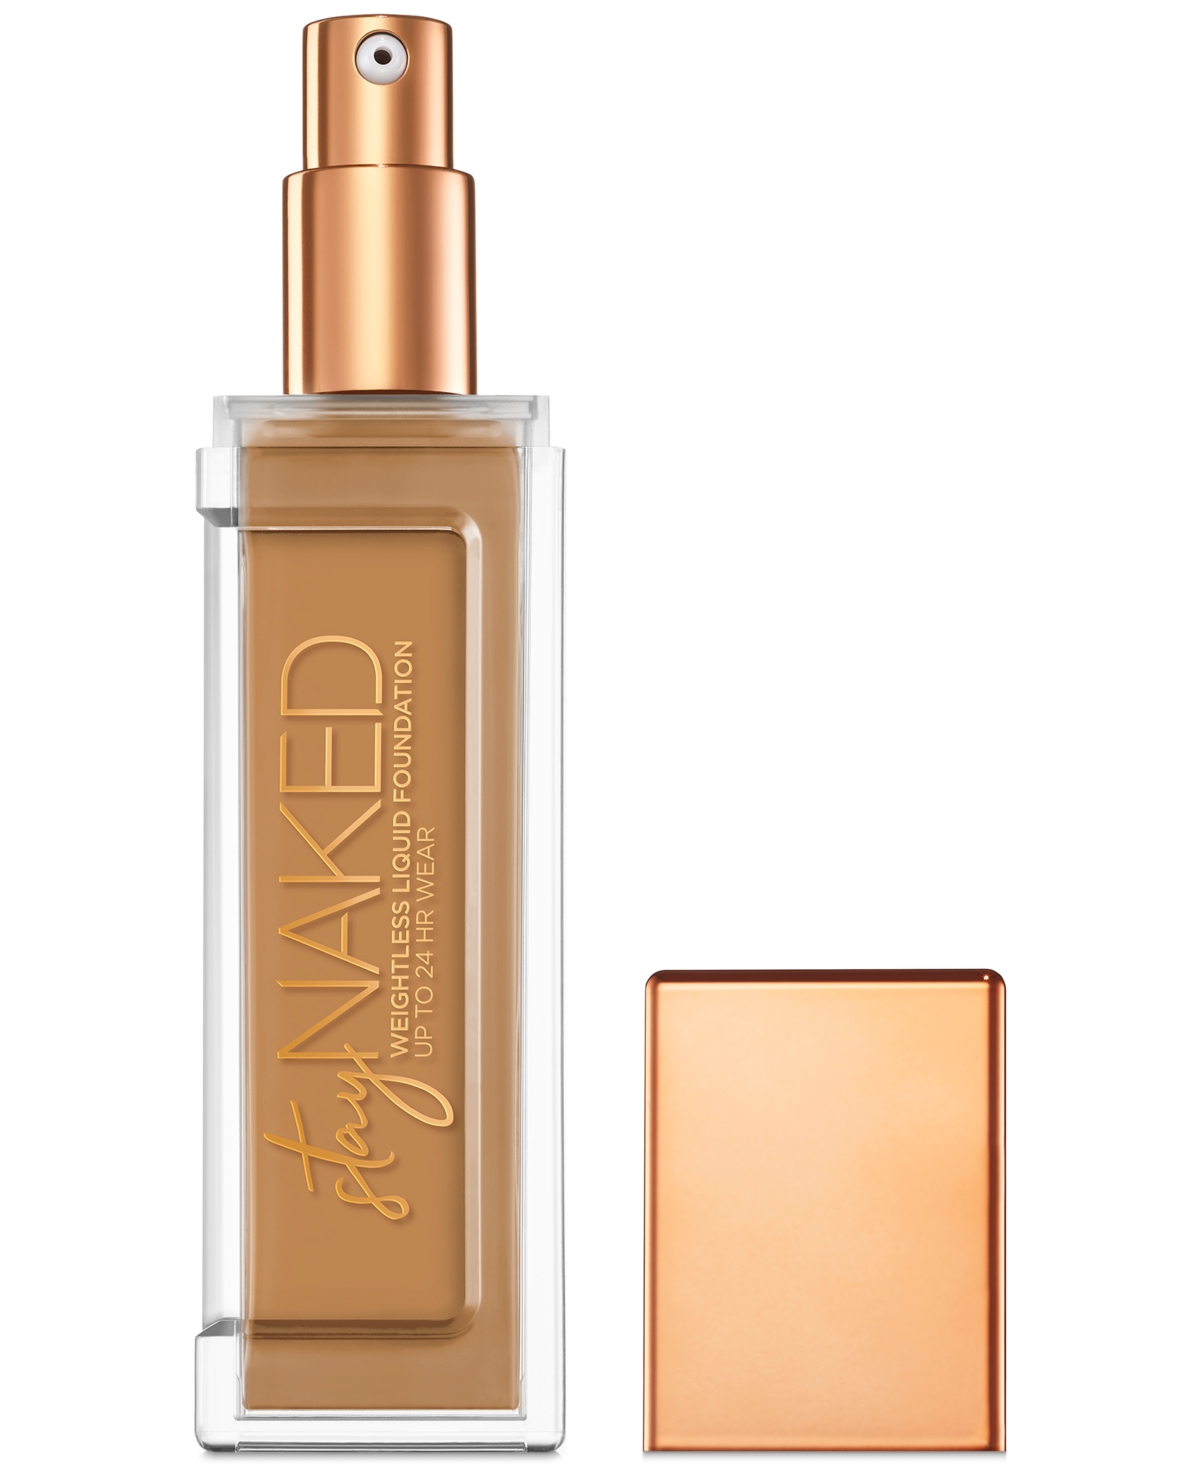 Urban Decay Stay Naked Lightweight Liquid Foundation, 1 Oz. In Cp (medium Cool,olive Undertone)